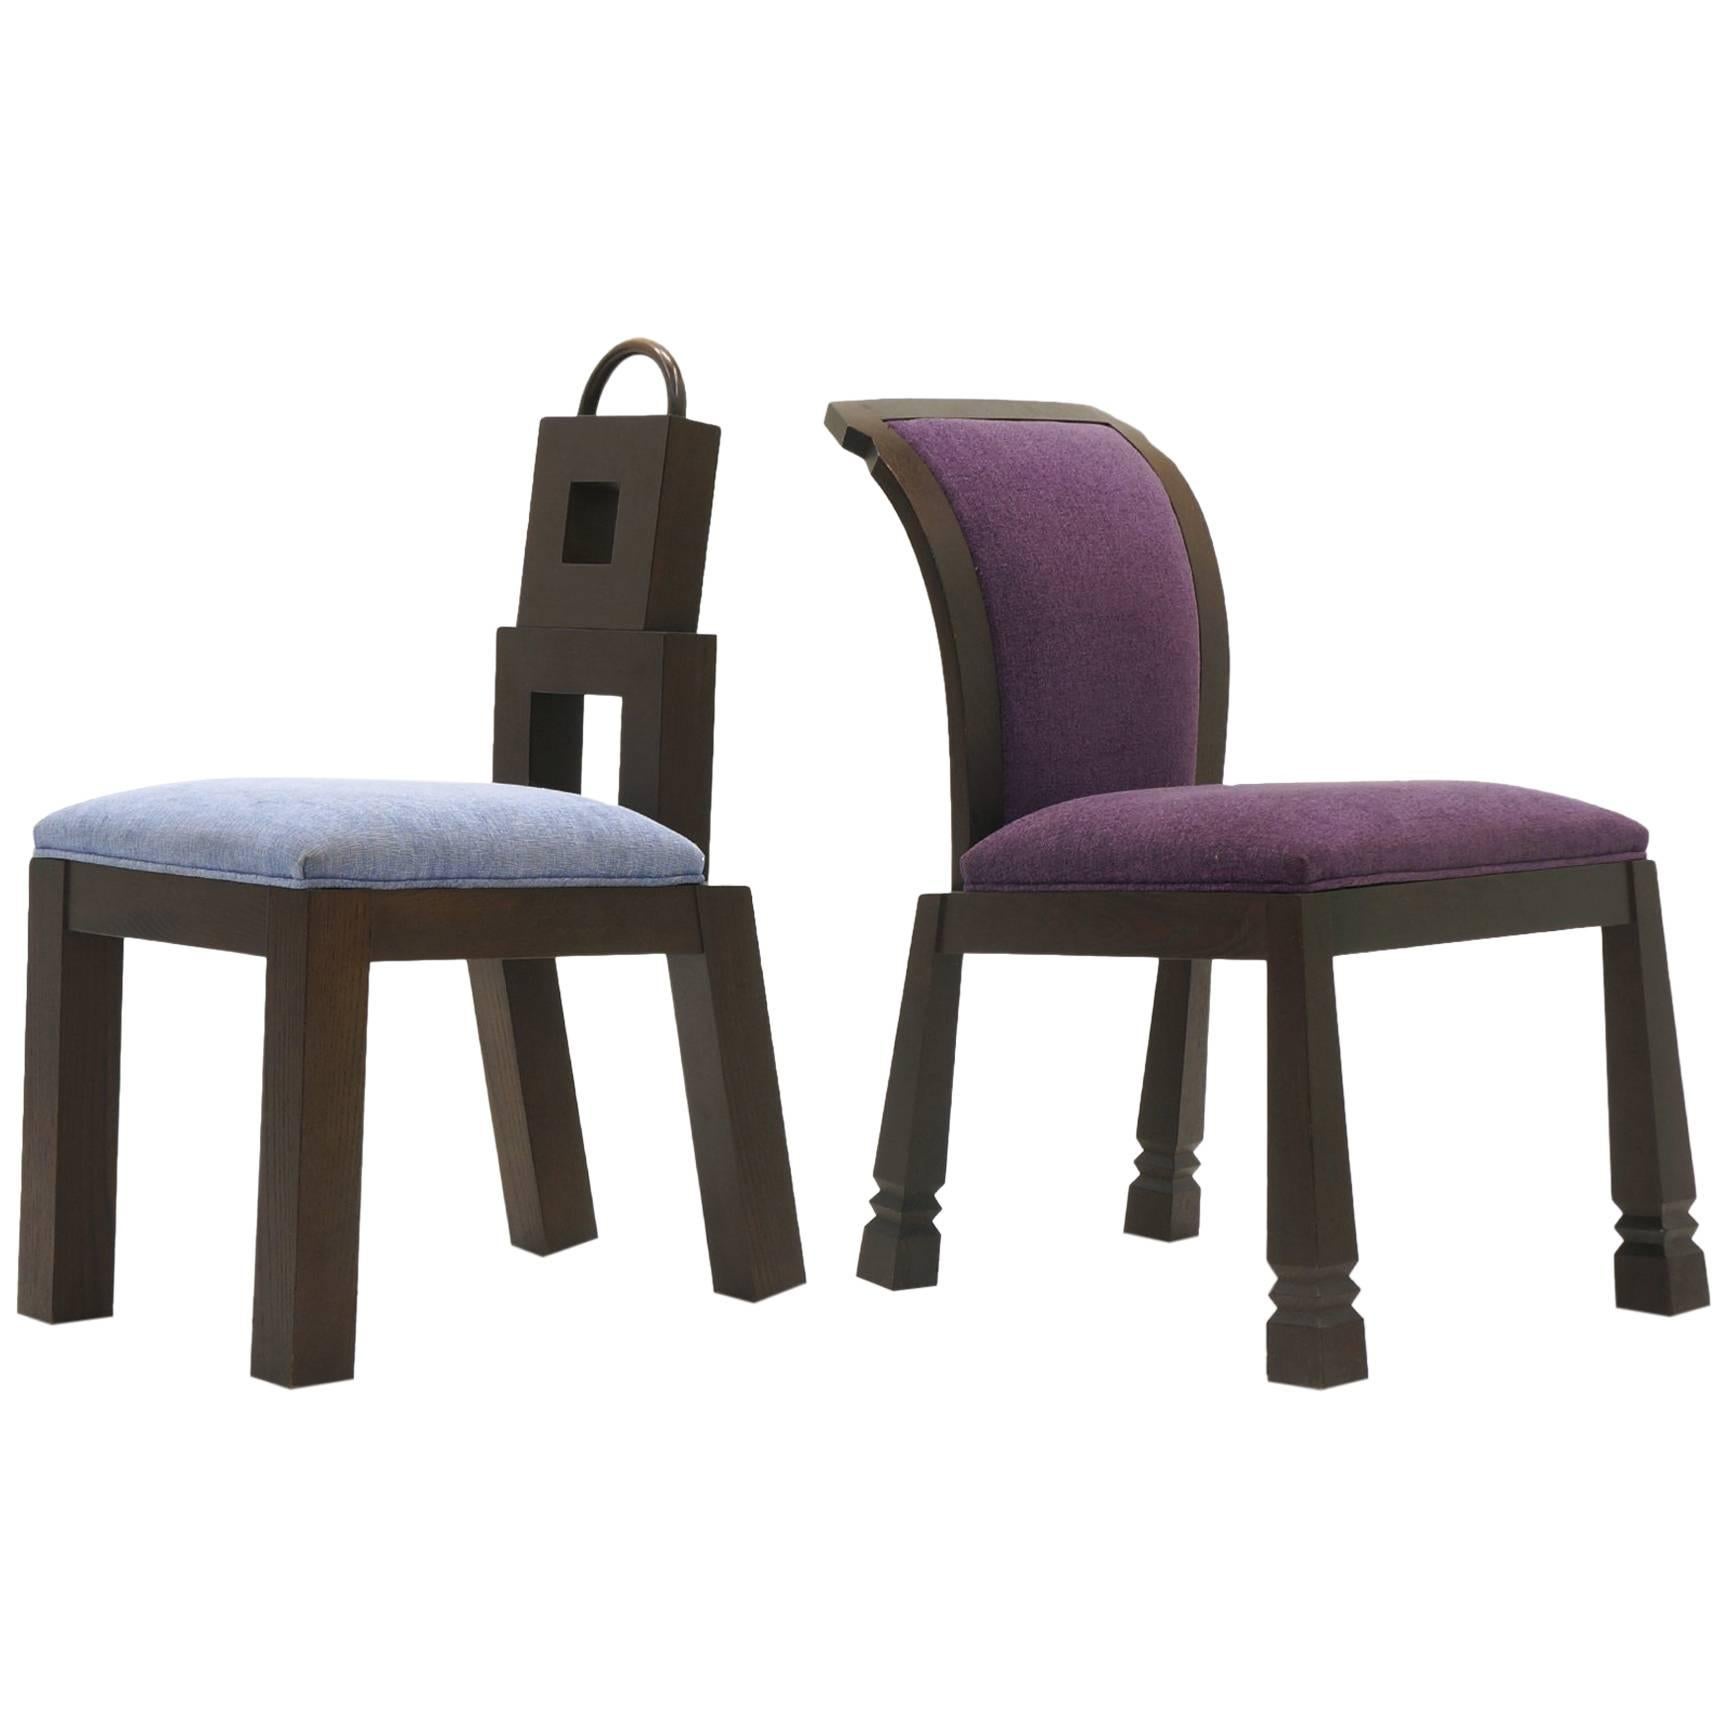 Wendell Castle Chairs For Sale